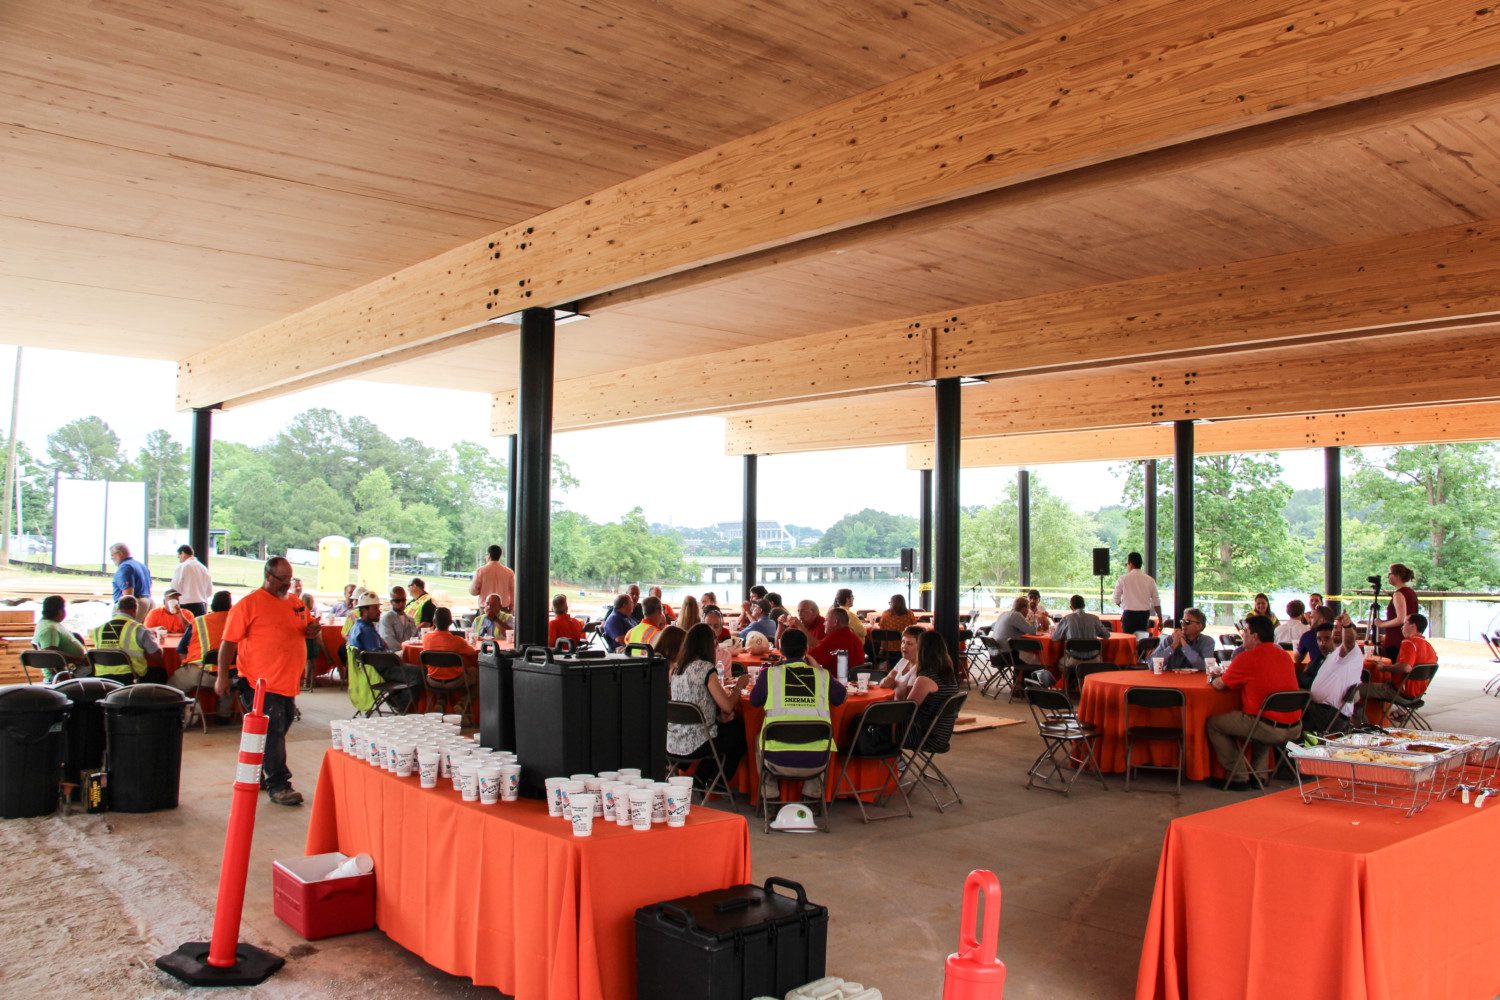 Members of Sherman Construction, Campus Recreation and other project stakeholders came together May 8 to celebrate progress on the 16,500-square foot Outdoor Education Center, located at the Snow Family Outdoor Fitness and Wellness Center.